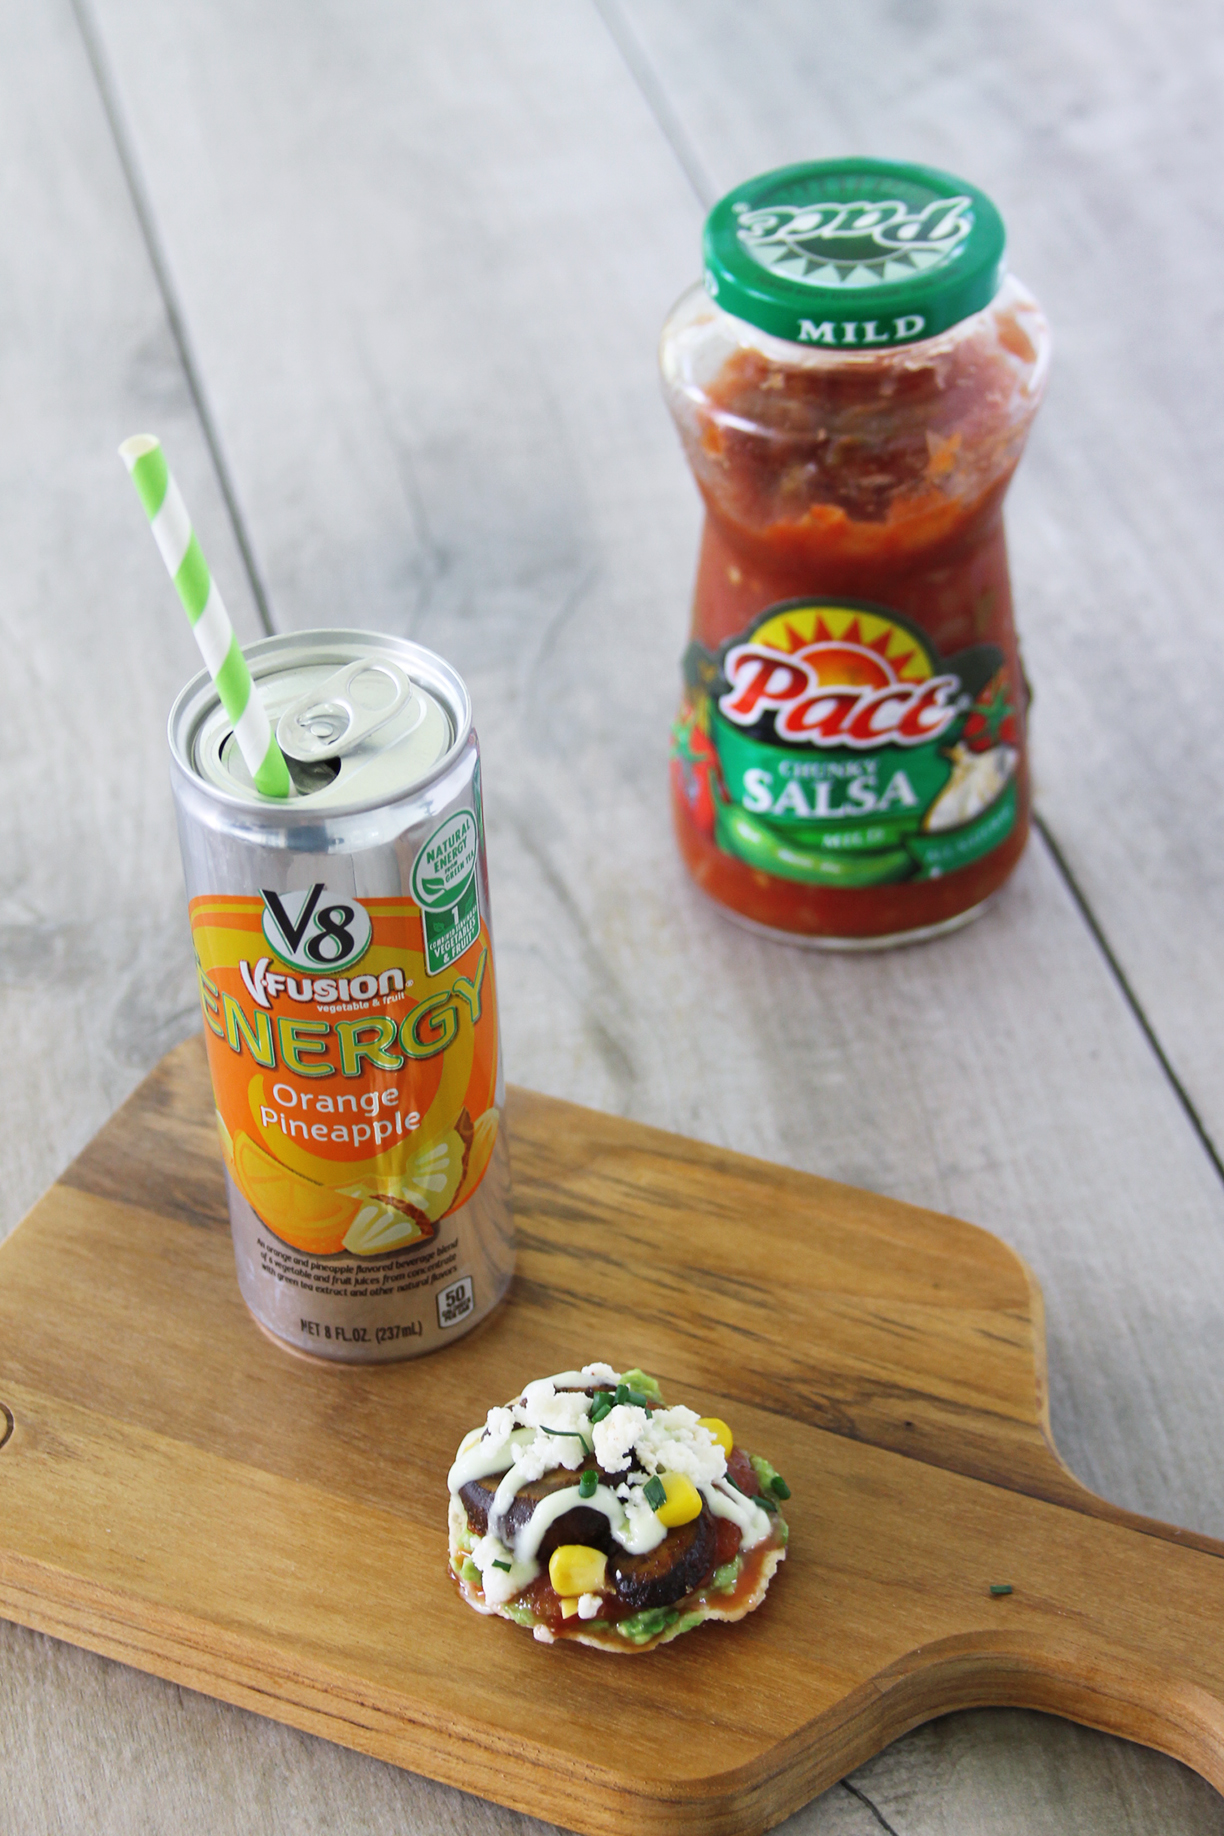 mini tostadas appetizers and V8+Energy drink